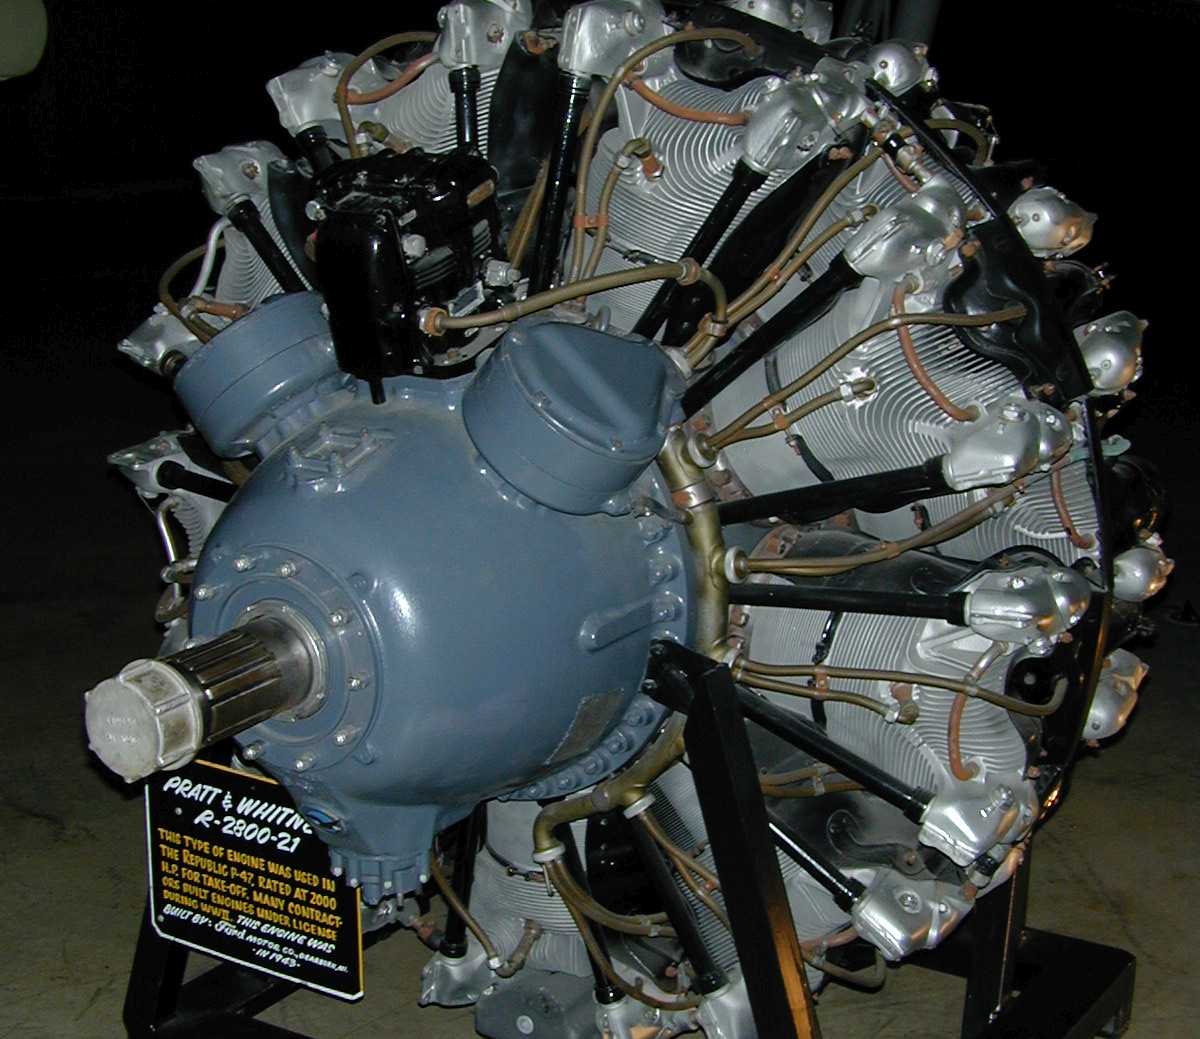 R-2800 Double Wasp